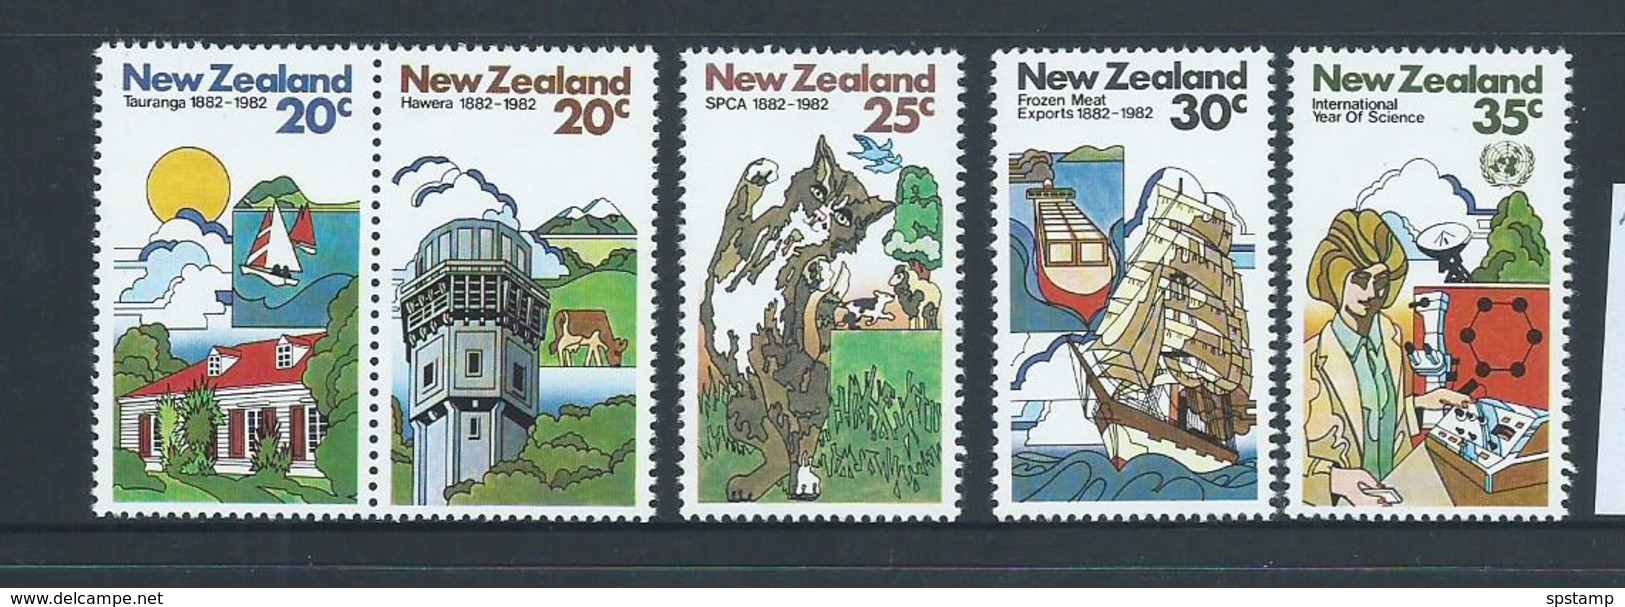 New Zealand 1981 Anniversaries & Events Set 5 - Pair & 3 Singles - MNH - Unused Stamps